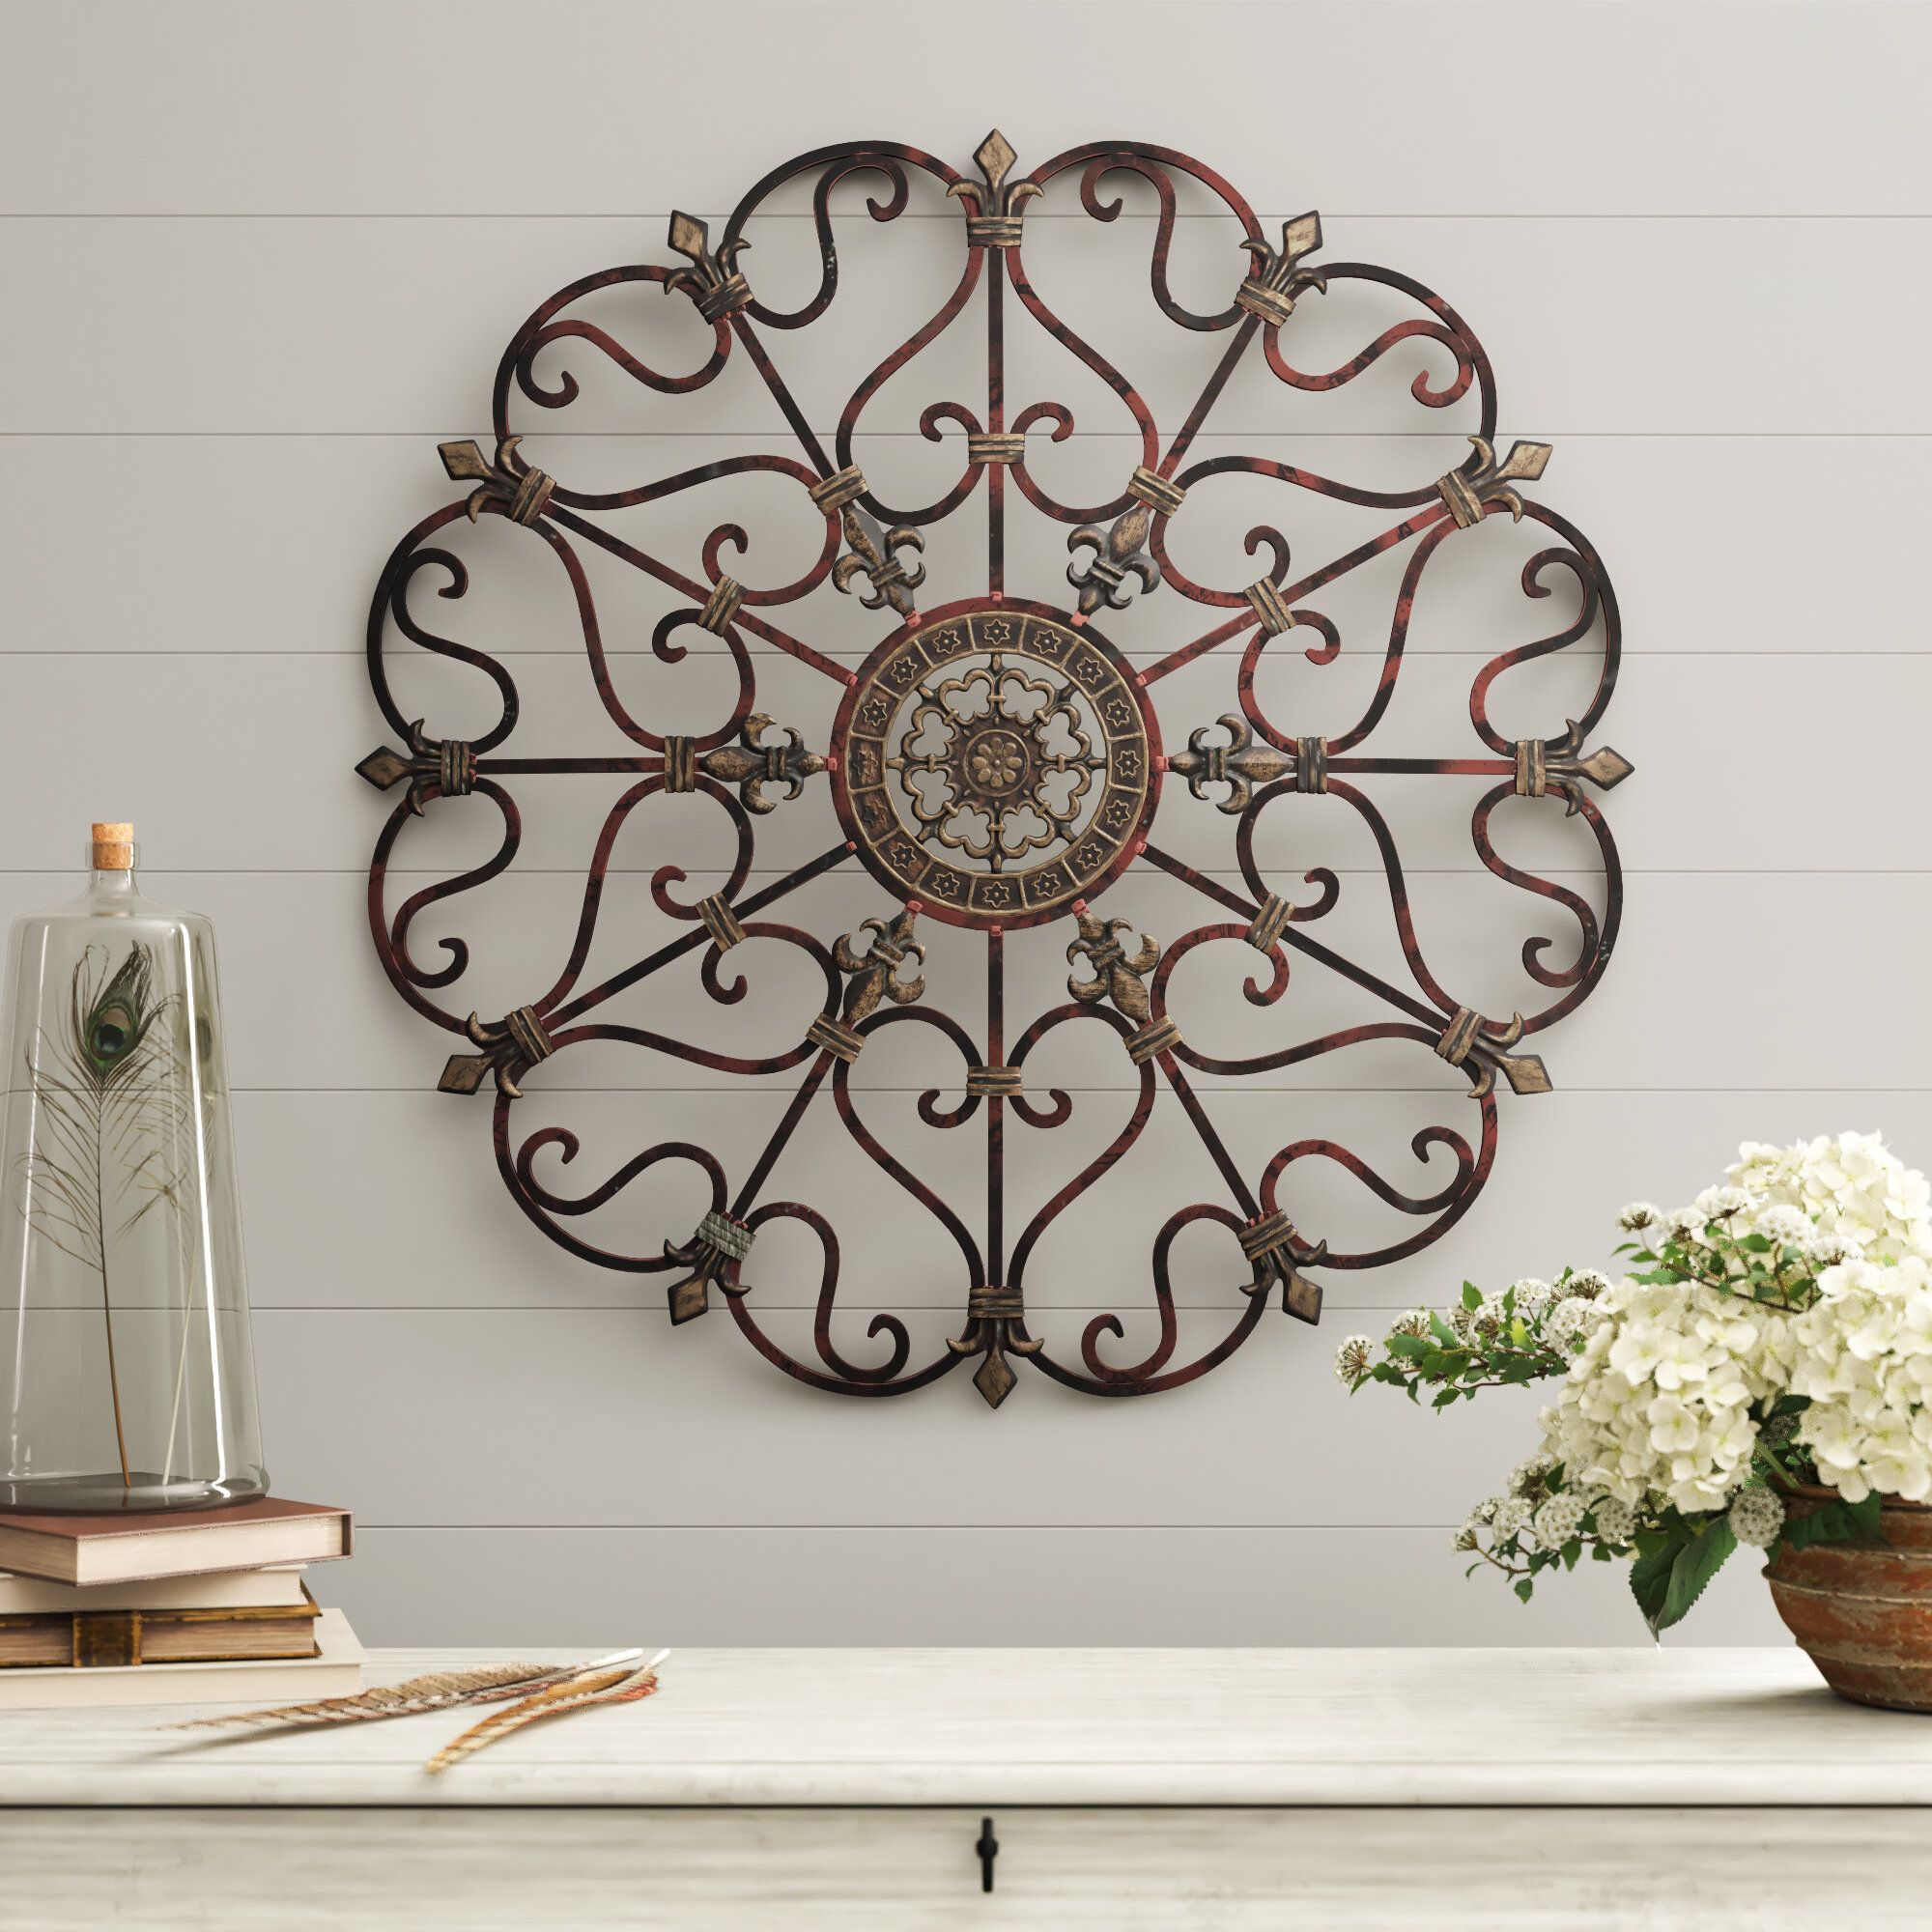 Farmhouse & Rustic Wall Decor | Birch Lane Intended For Raised Star Wall Decor (View 13 of 30)